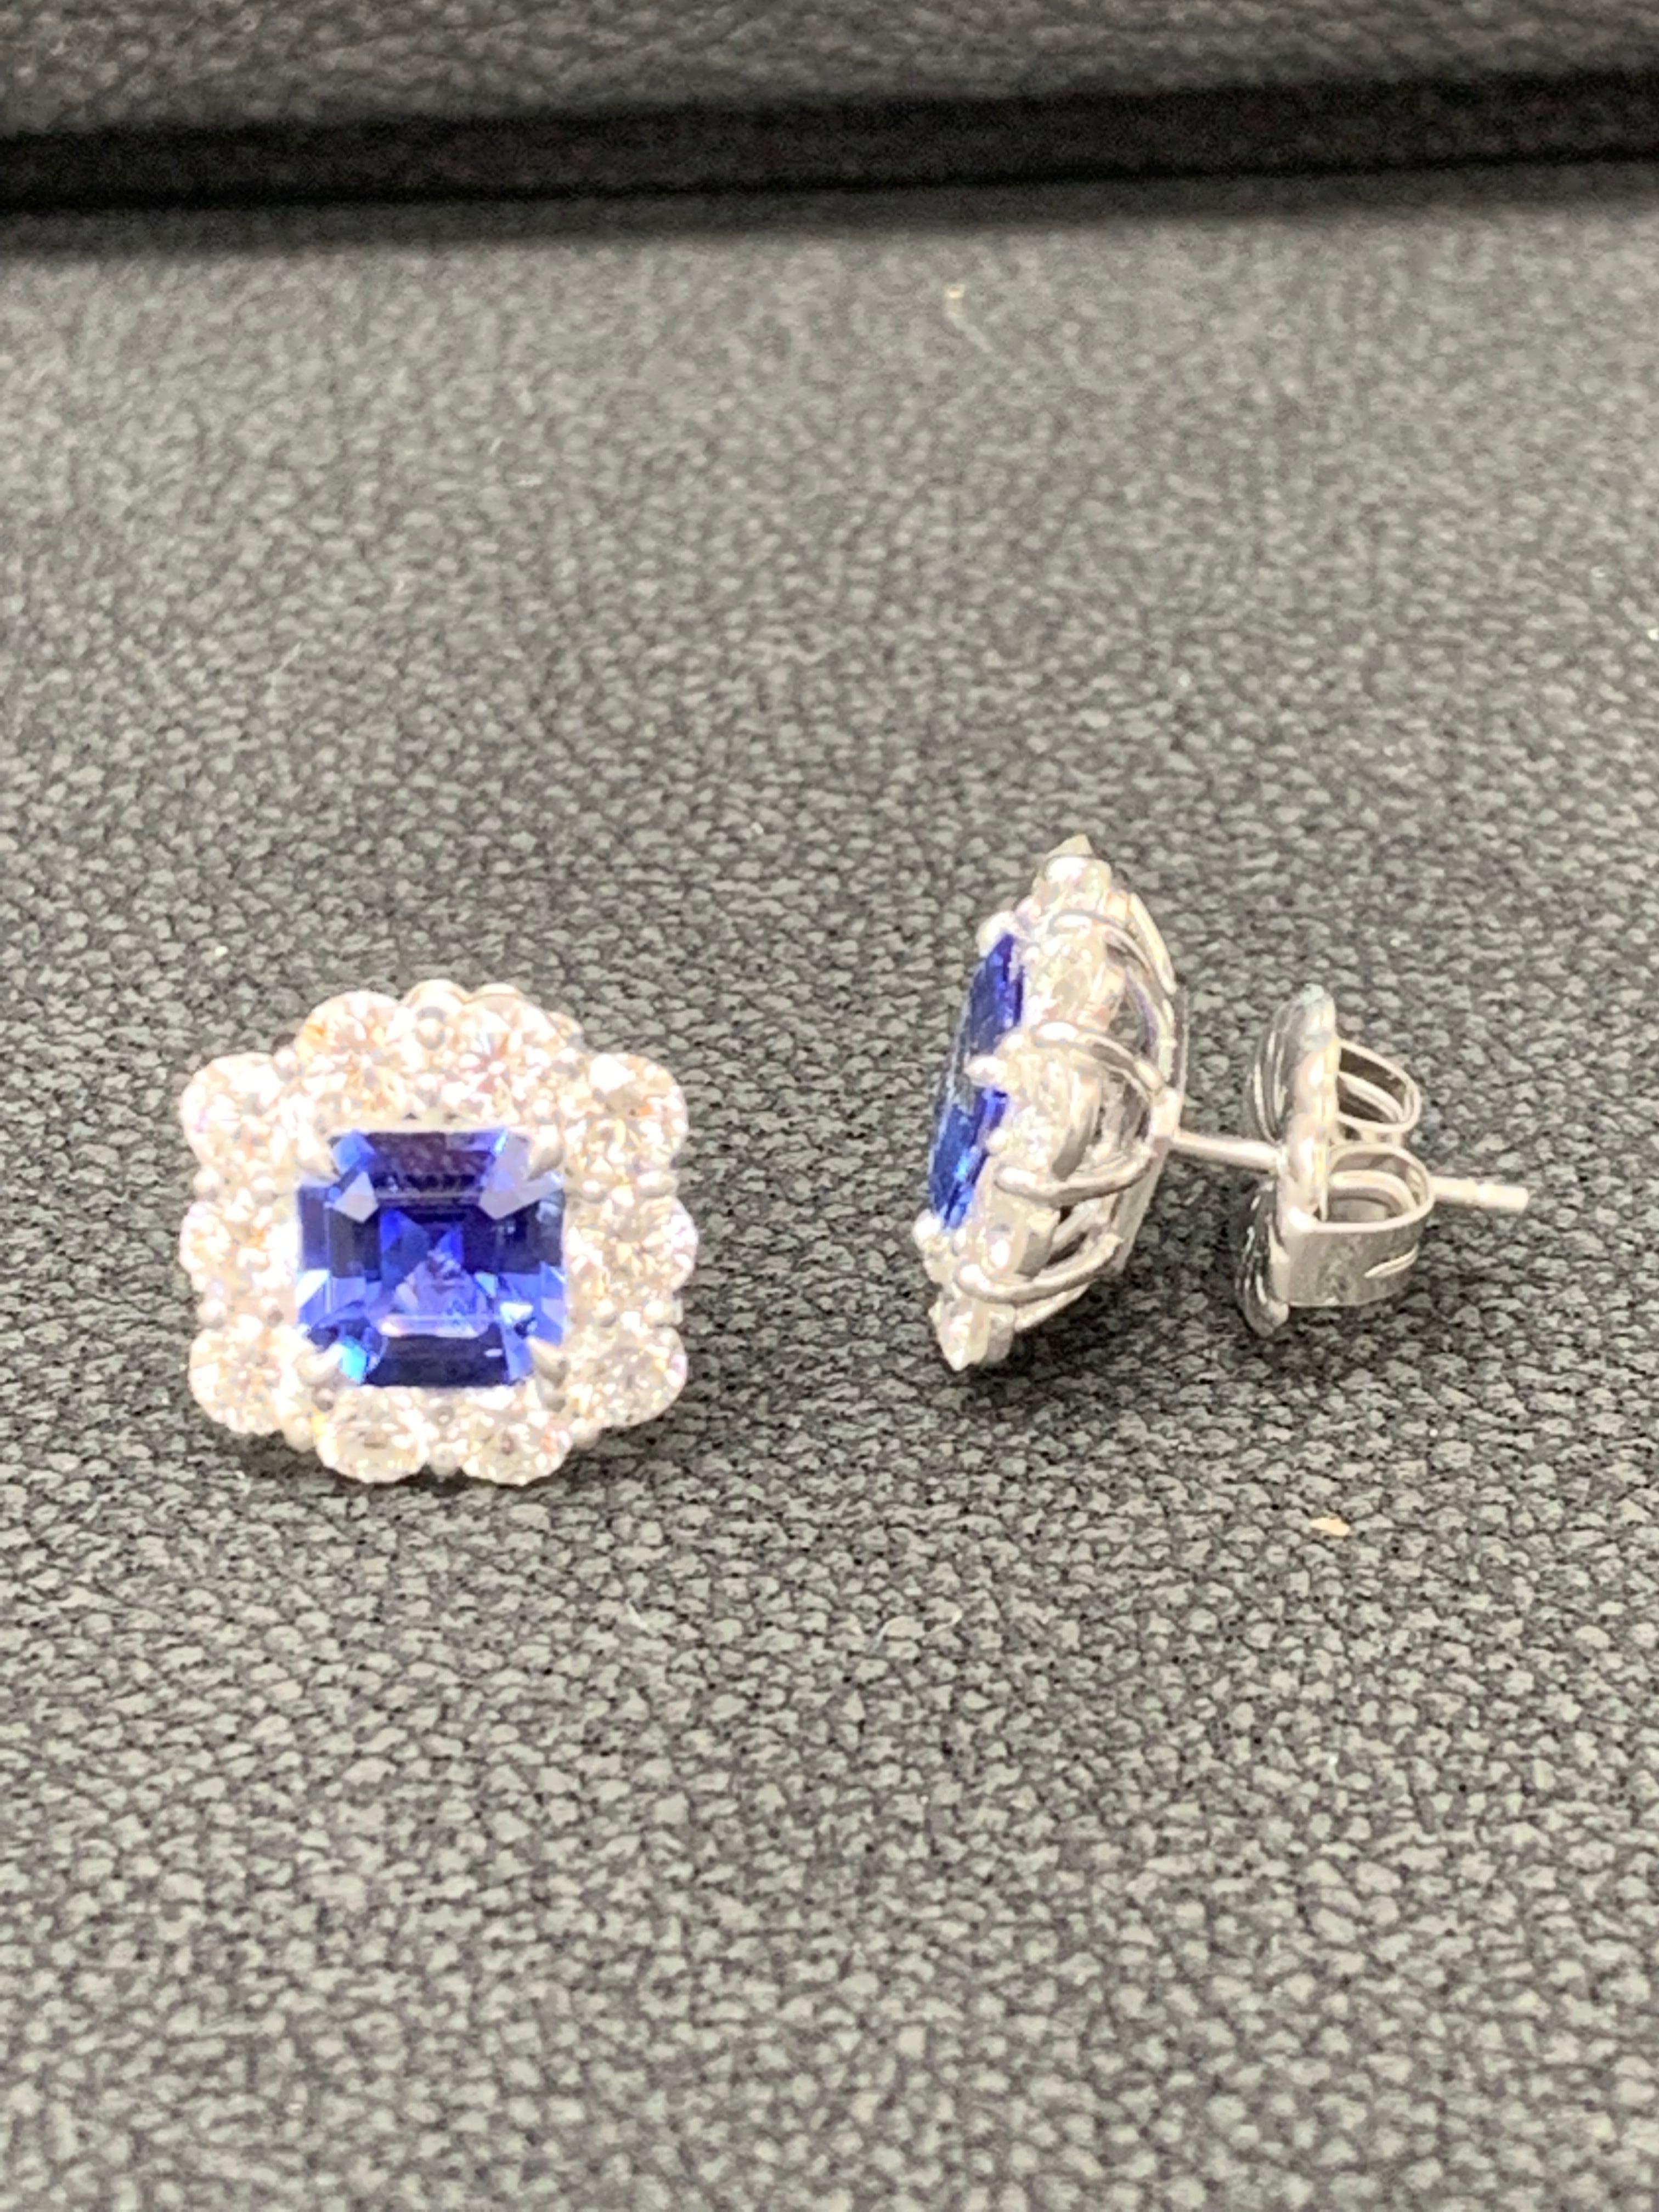 A timeless pair of earrings showcasing two emerald cut blue sapphires weighing 3.02 carats total, accented with a row of 20 round brilliant diamonds weighing 2.63 carats total. Made in 18k white gold. 